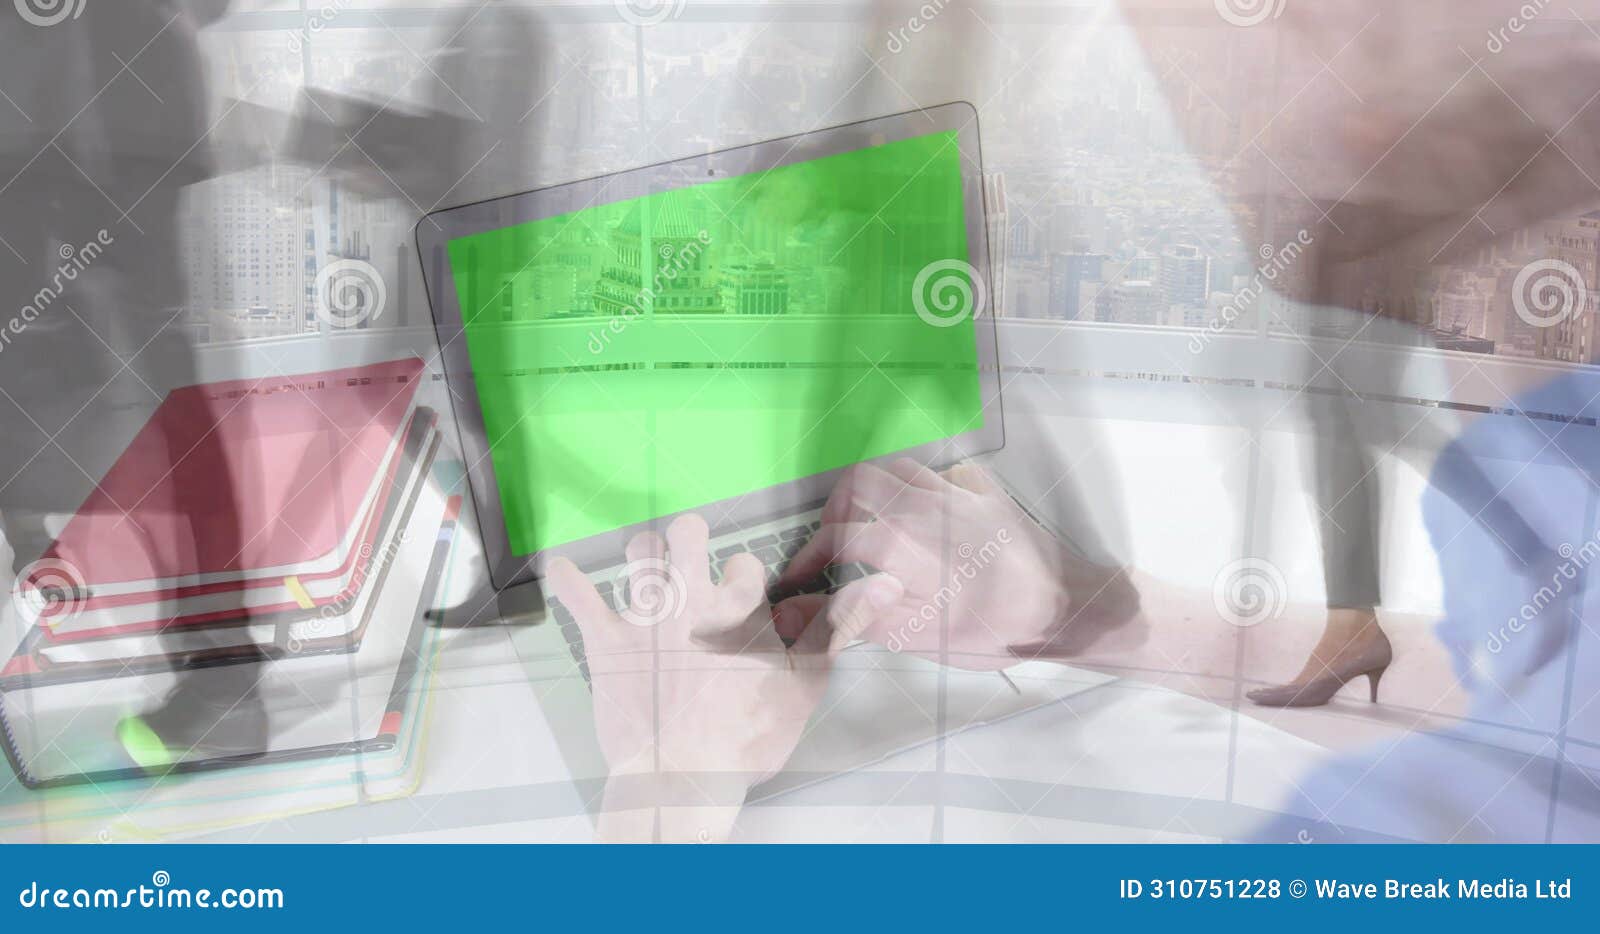 image of man using laptop with green screen over sped up commuters walking in modern building